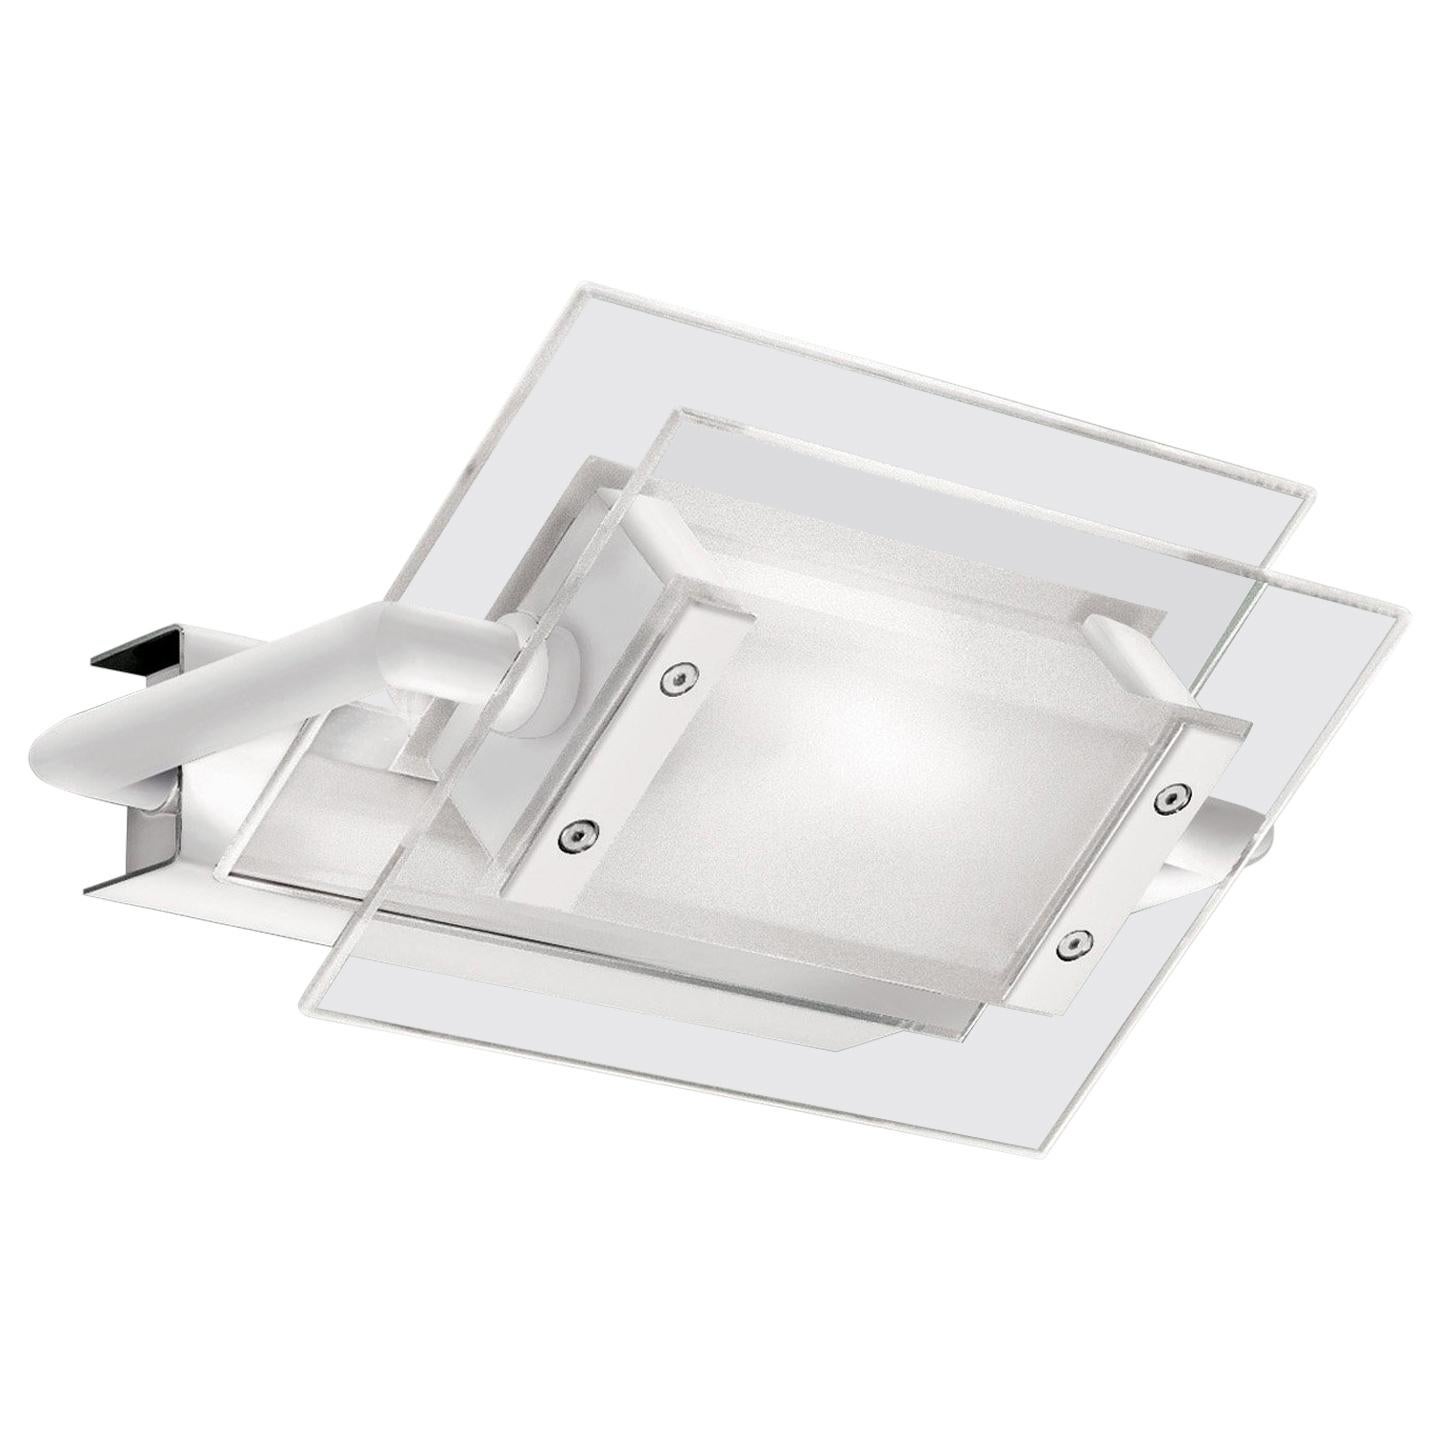 Leucos 360° P-PL 120 Wall Light in Satin, Transparent and White by Design Lab For Sale